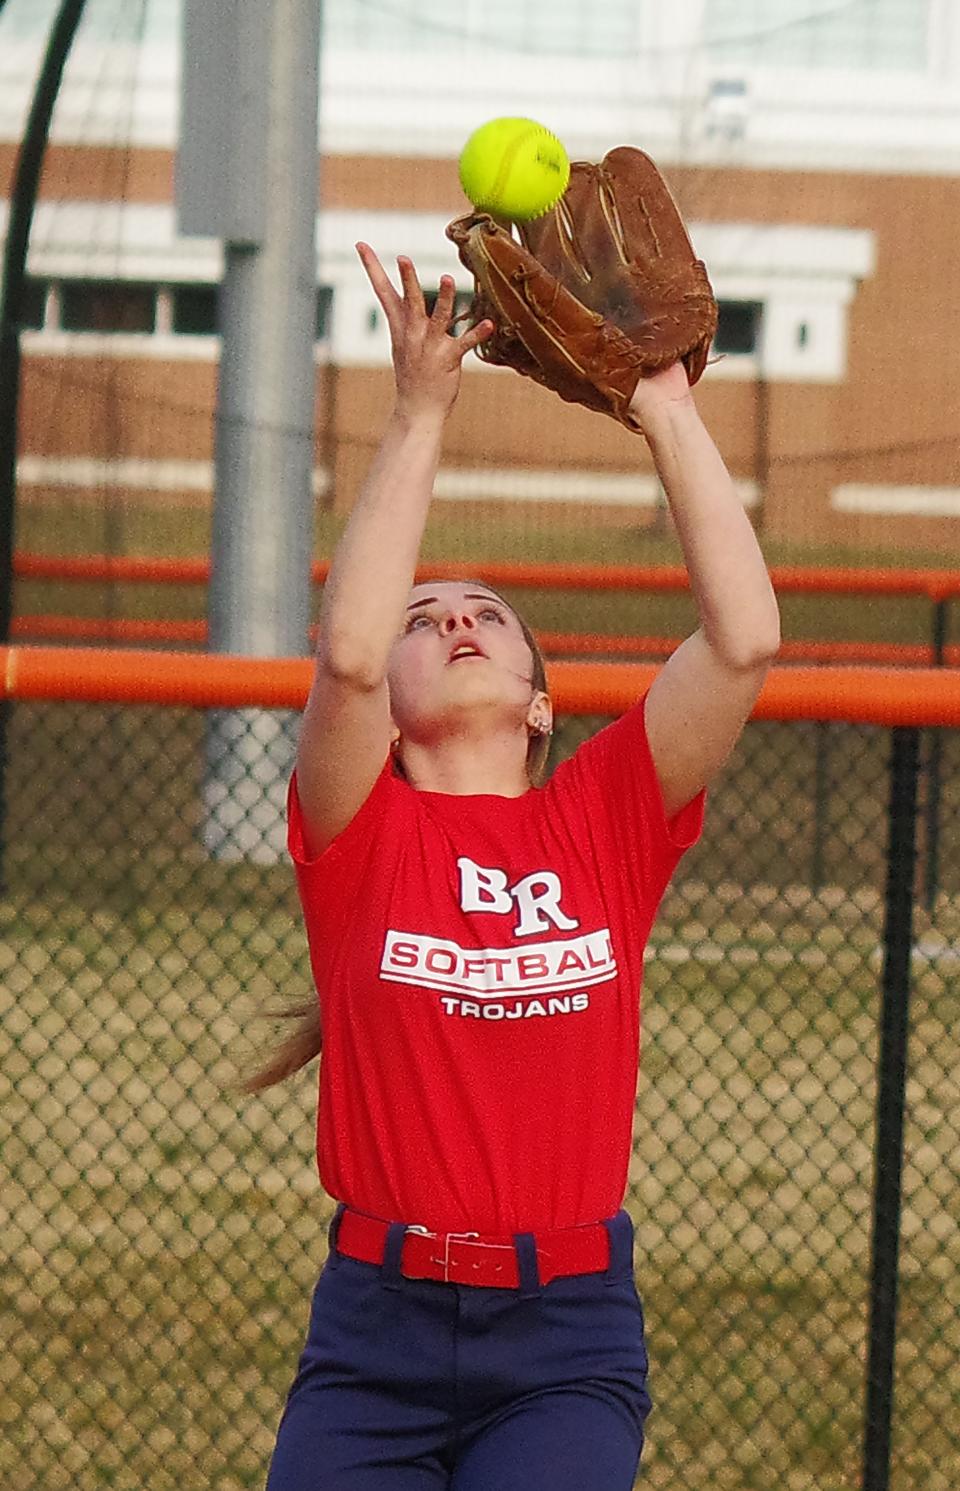 Abby Campbell of Bridgewater-Raynham makes the catch while backing up to short right field during the softball scrimmage with Middleboro on Monday, March 27, 2023.